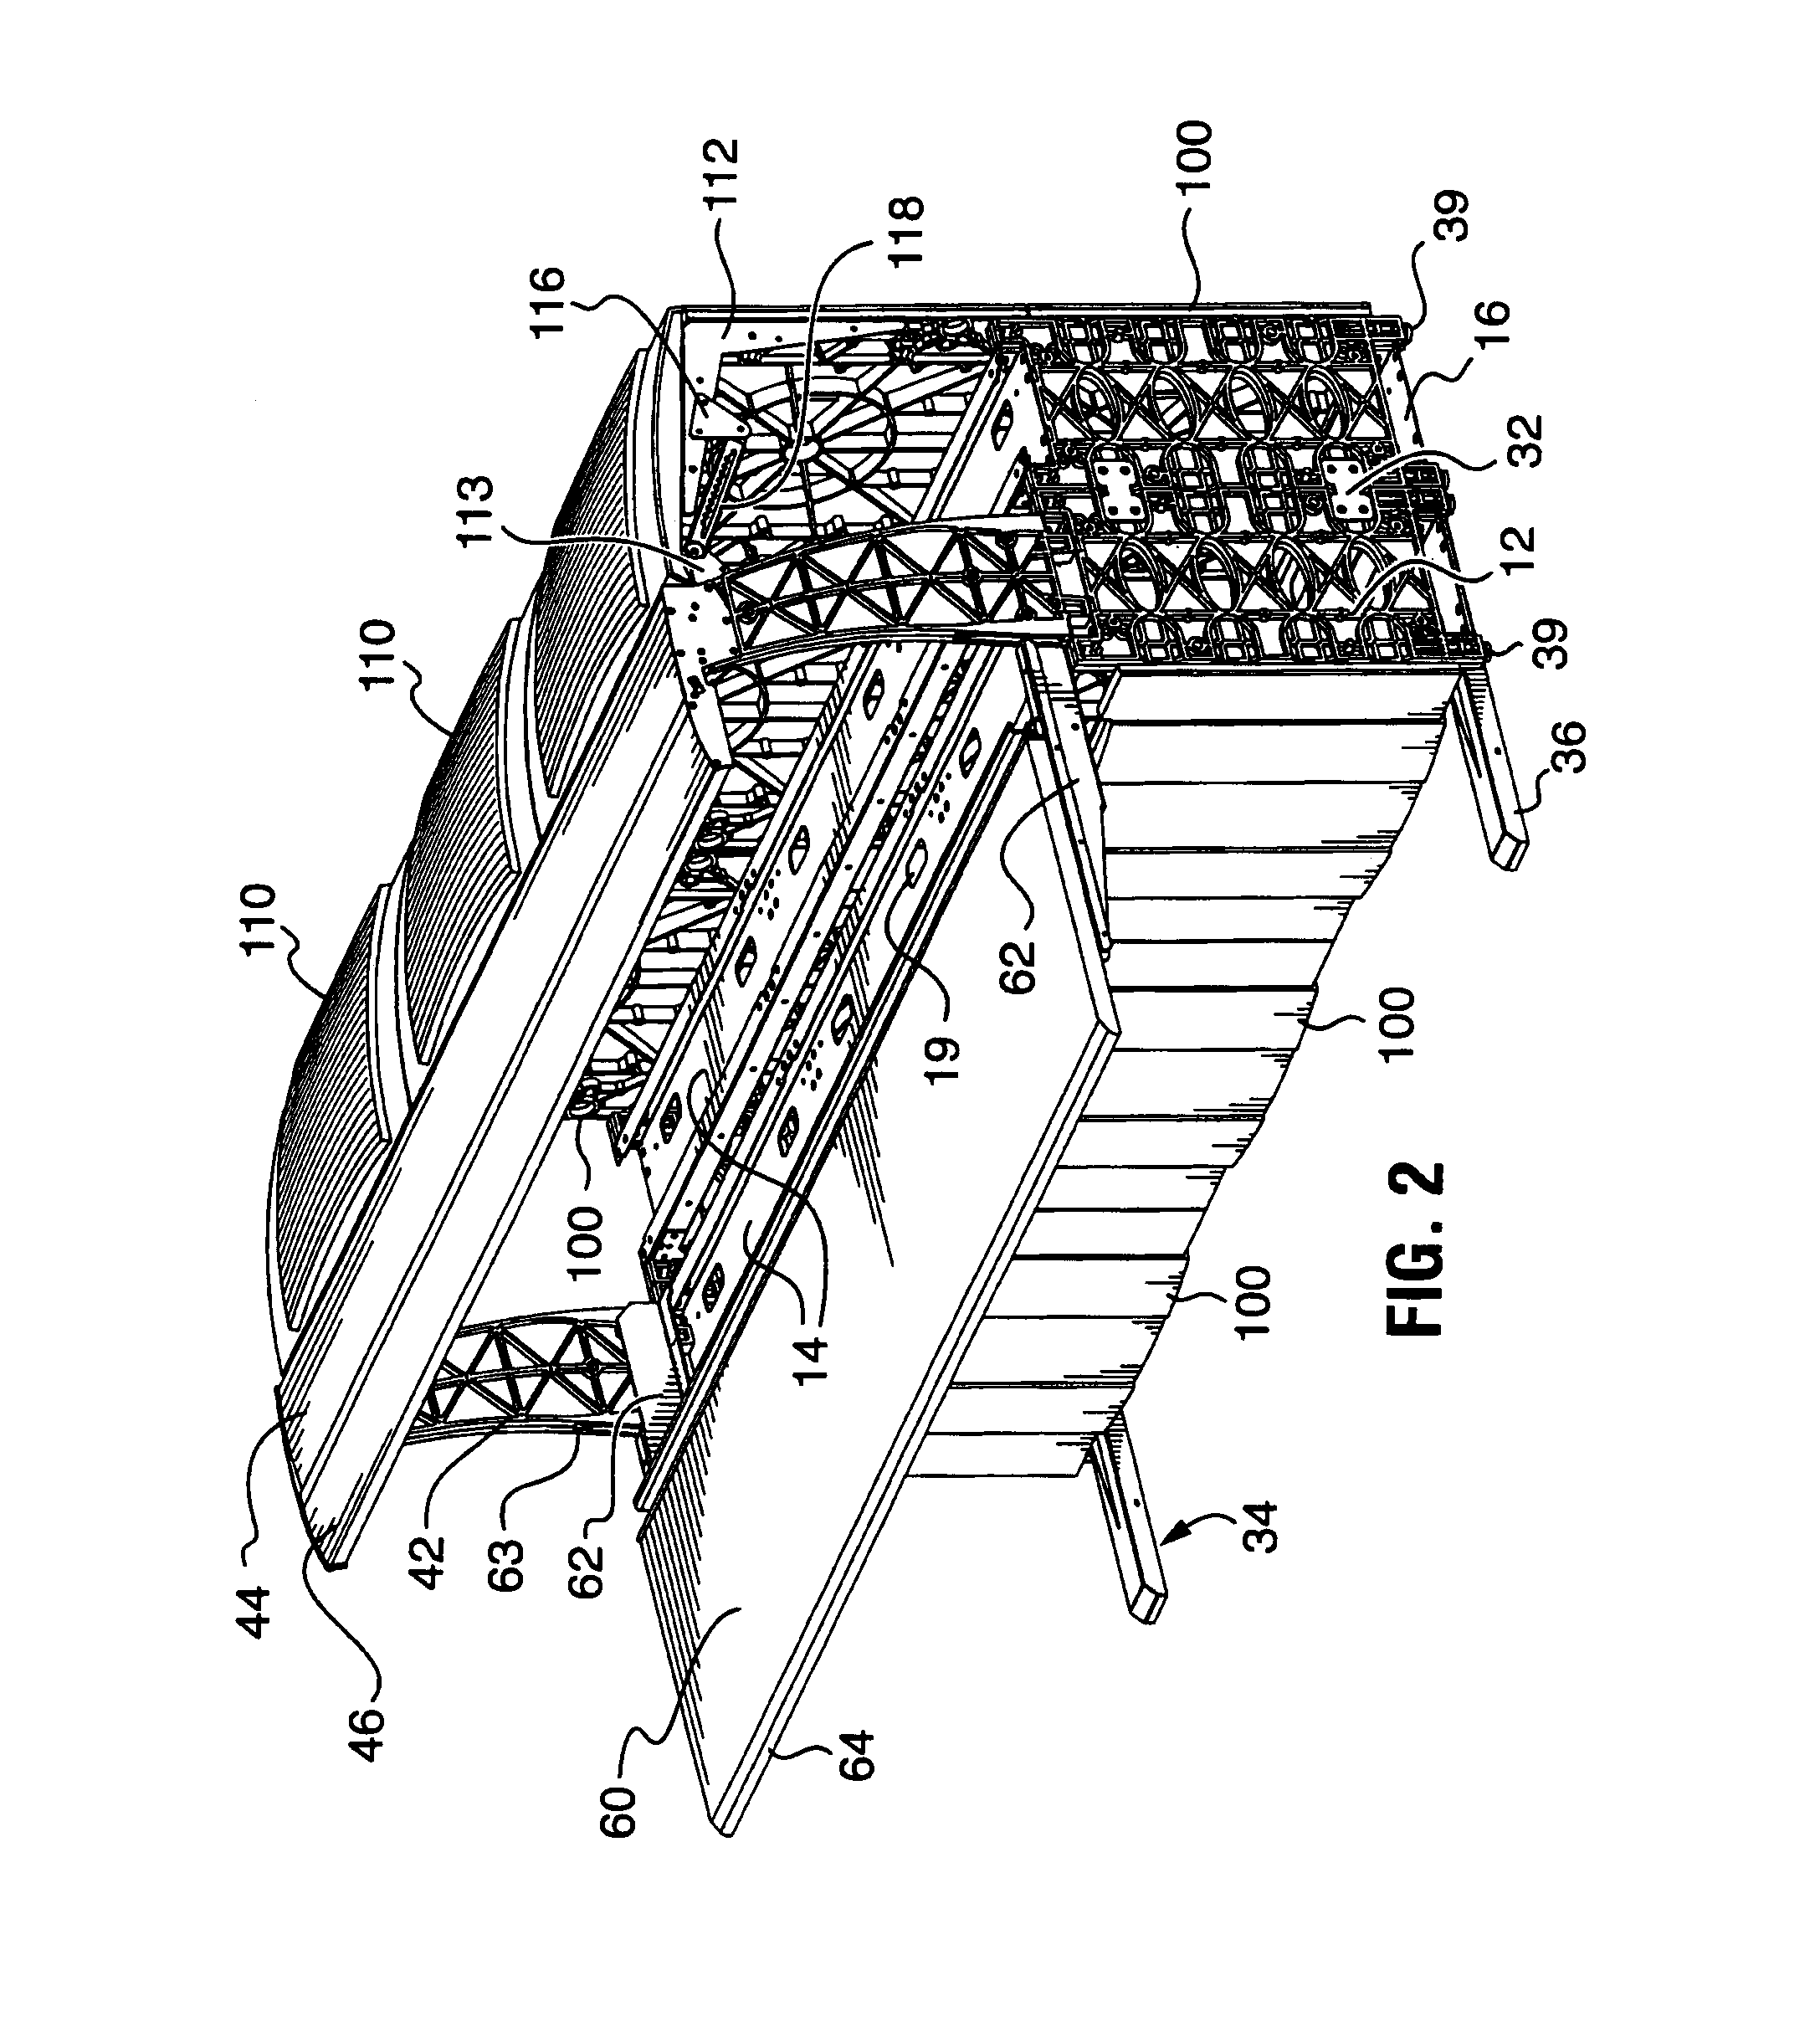 Console with positionally independent upper and lower halves